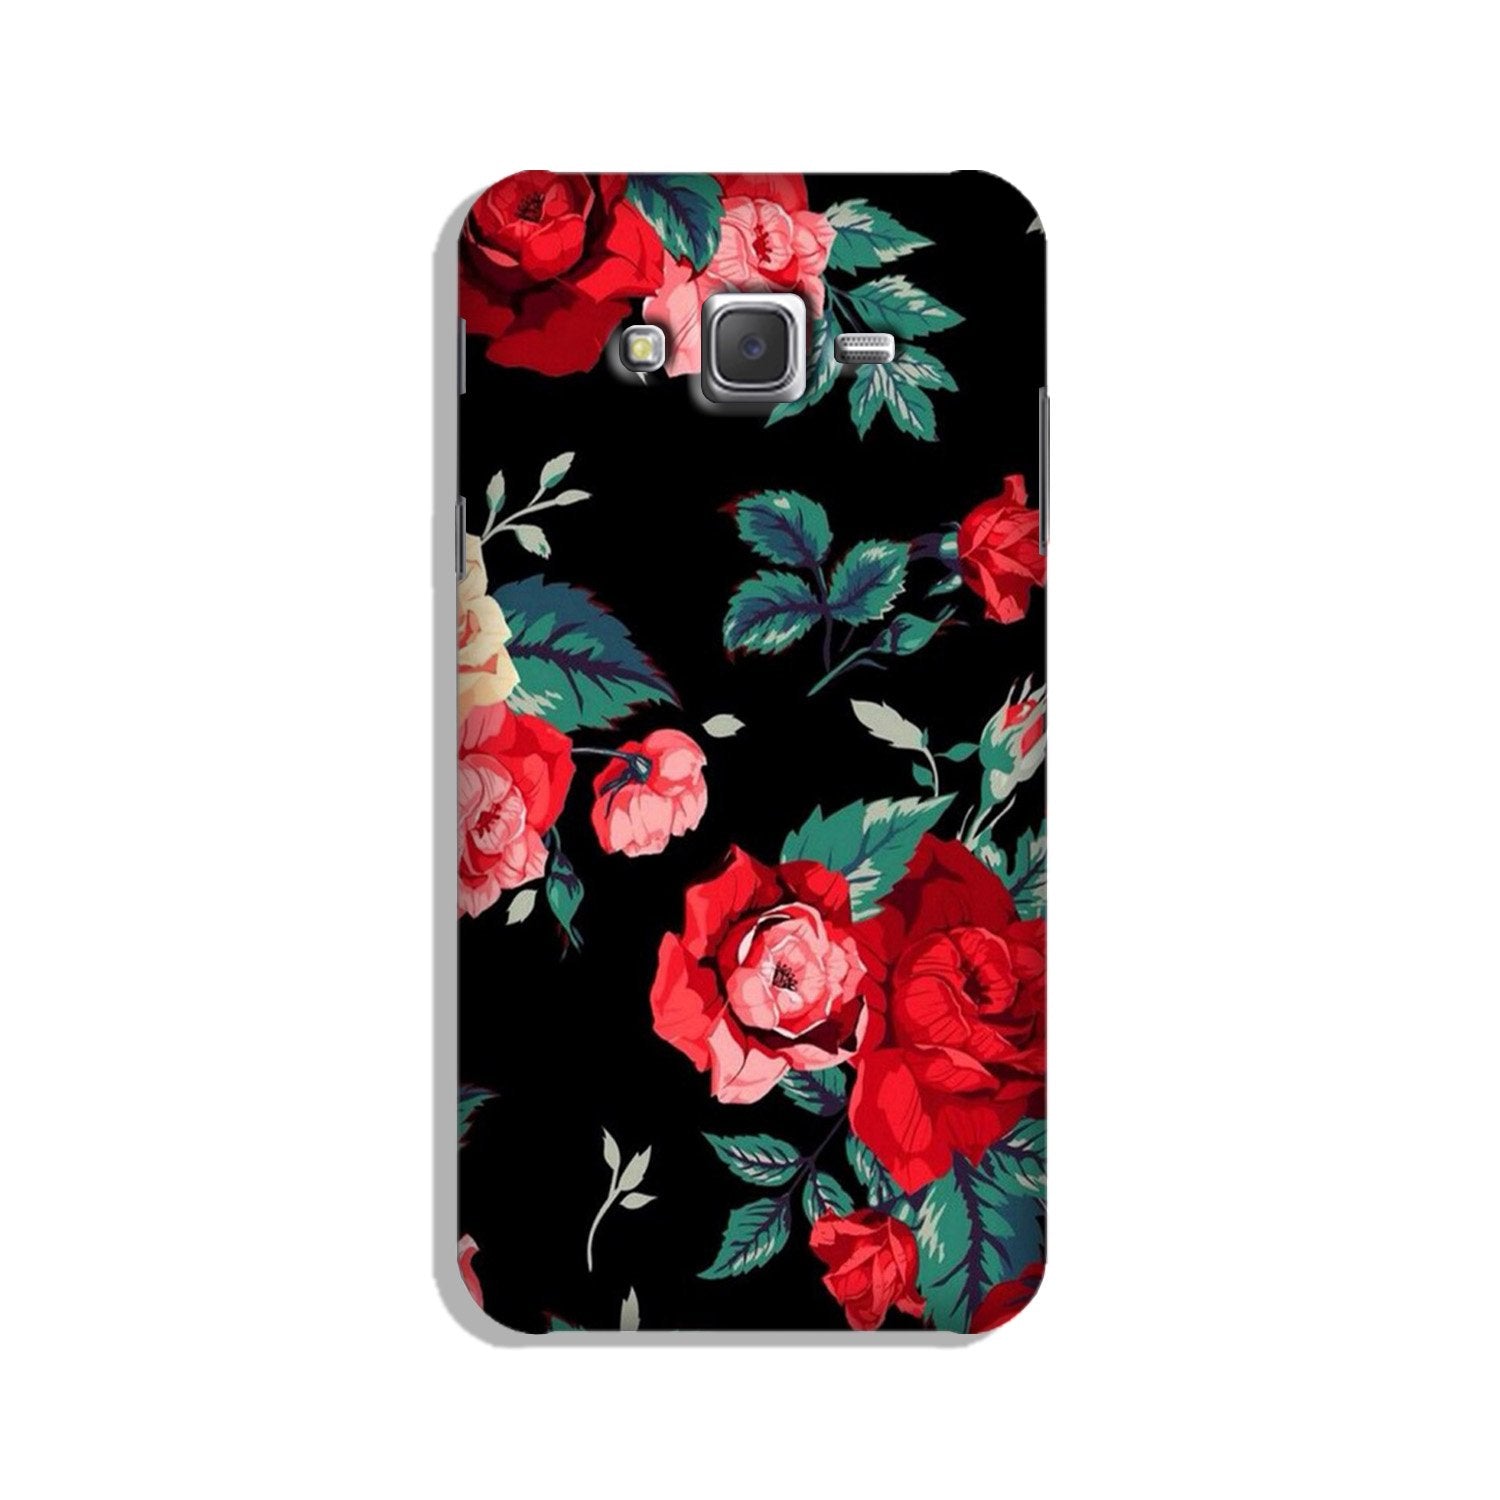 Red Rose2 Case for Galaxy J2 (2015)